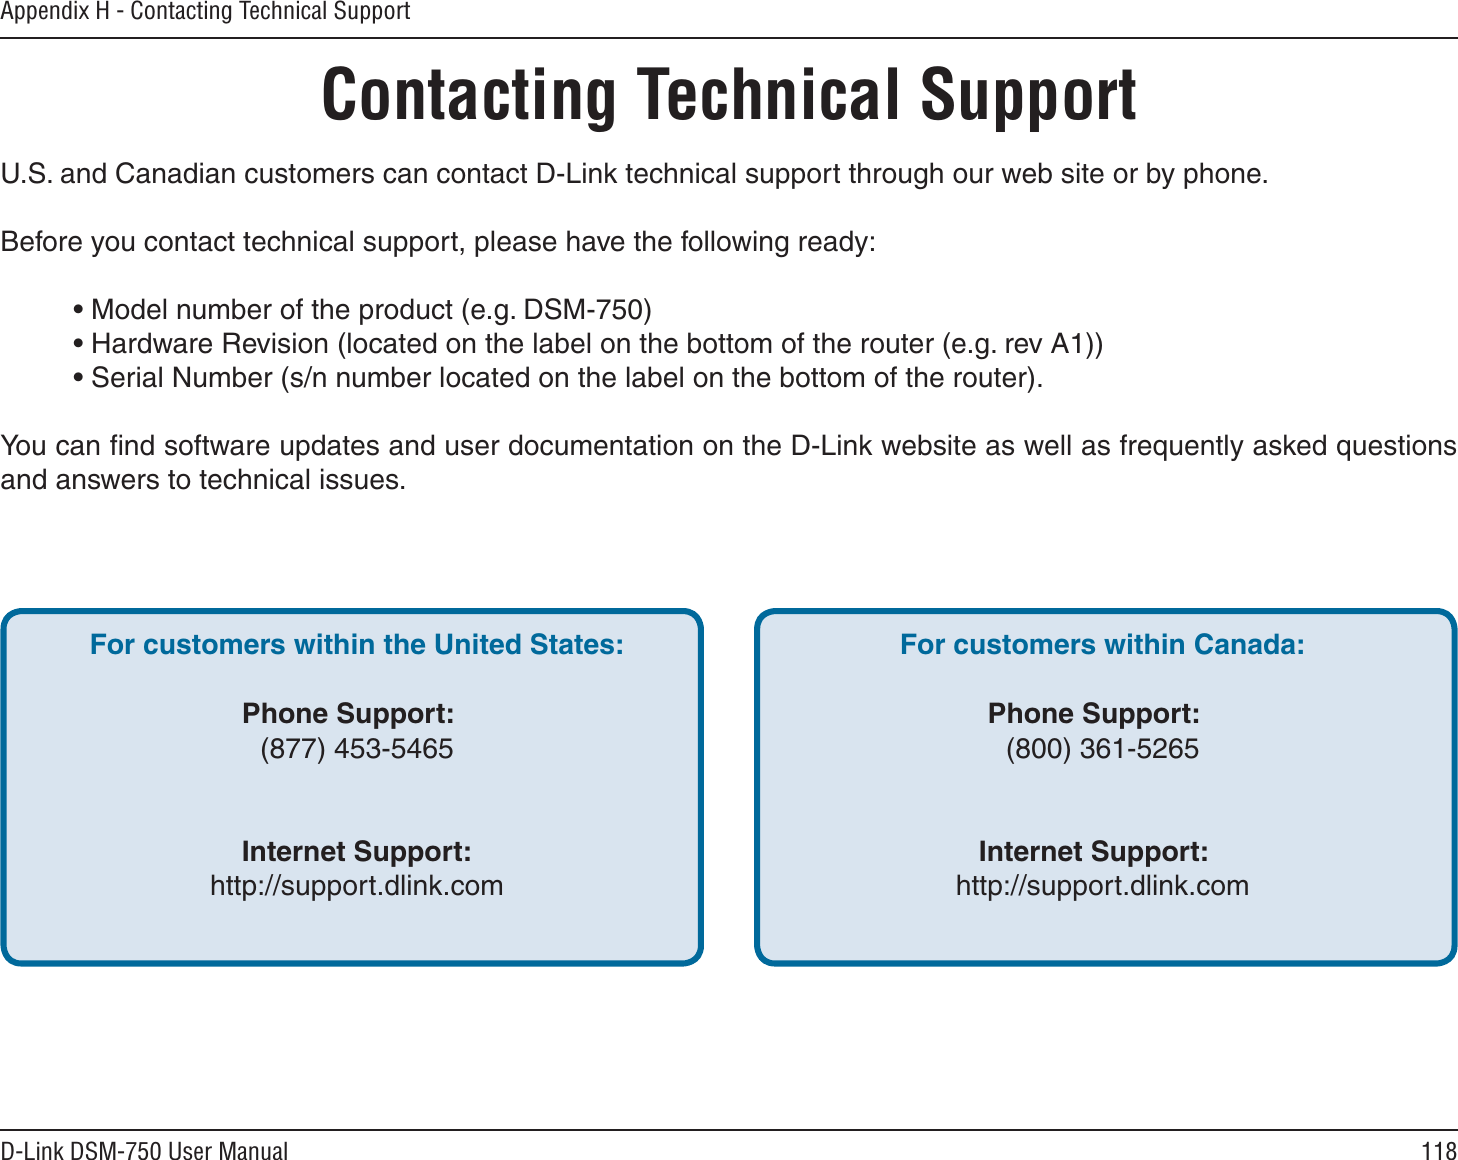 118D-Link DSM-750 User ManualAppendix H - Contacting Technical SupportContacting Technical SupportU.S. and Canadian customers can contact D-Link technical support through our web site or by phone.Before you contact technical support, please have the following ready:• Model number of the product (e.g. DSM-750)• Hardware Revision (located on the label on the bottom of the router (e.g. rev A1))• Serial Number (s/n number located on the label on the bottom of the router). You can ﬁnd software updates and user documentation on the D-Link website as well as frequently asked questions and answers to technical issues.For customers within the United States:Phone Support:(877) 453-5465Internet Support:http://support.dlink.comFor customers within Canada:Phone Support:(800) 361-5265  Internet Support:http://support.dlink.com